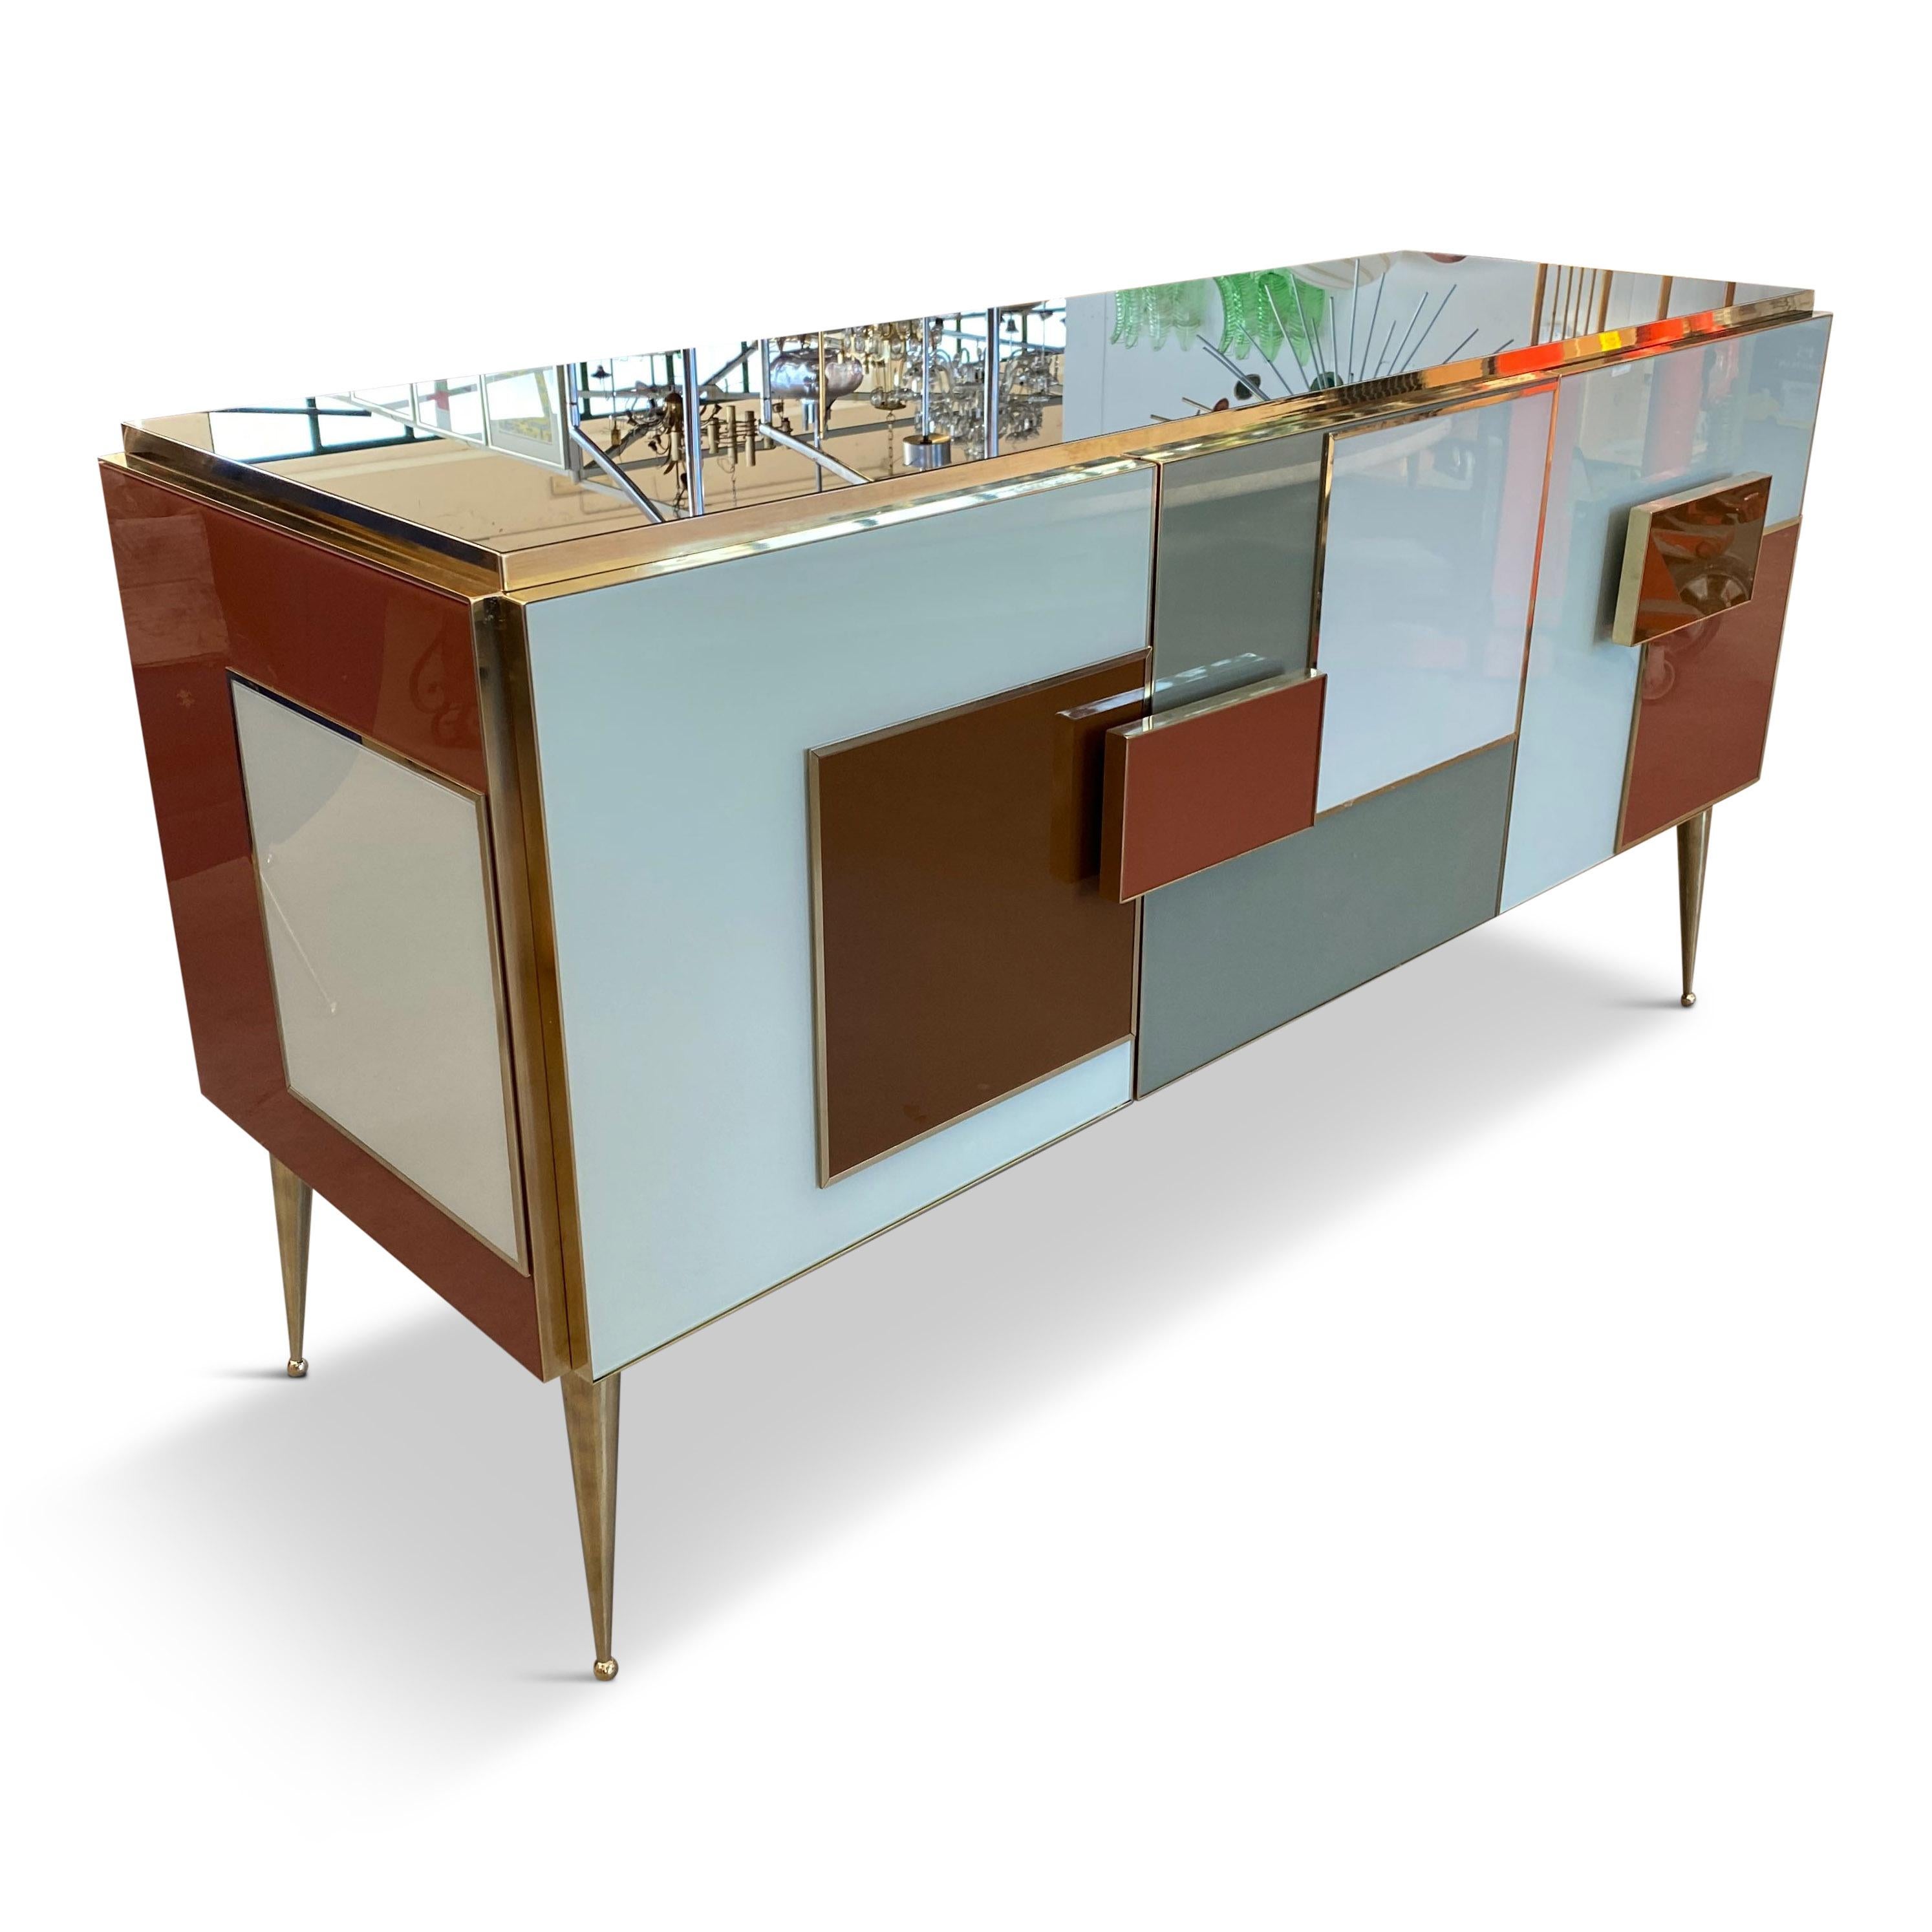 Bespoke sideboard

Colored glass panels

Brass inlay

Brass legs

Contemporary, Italy.